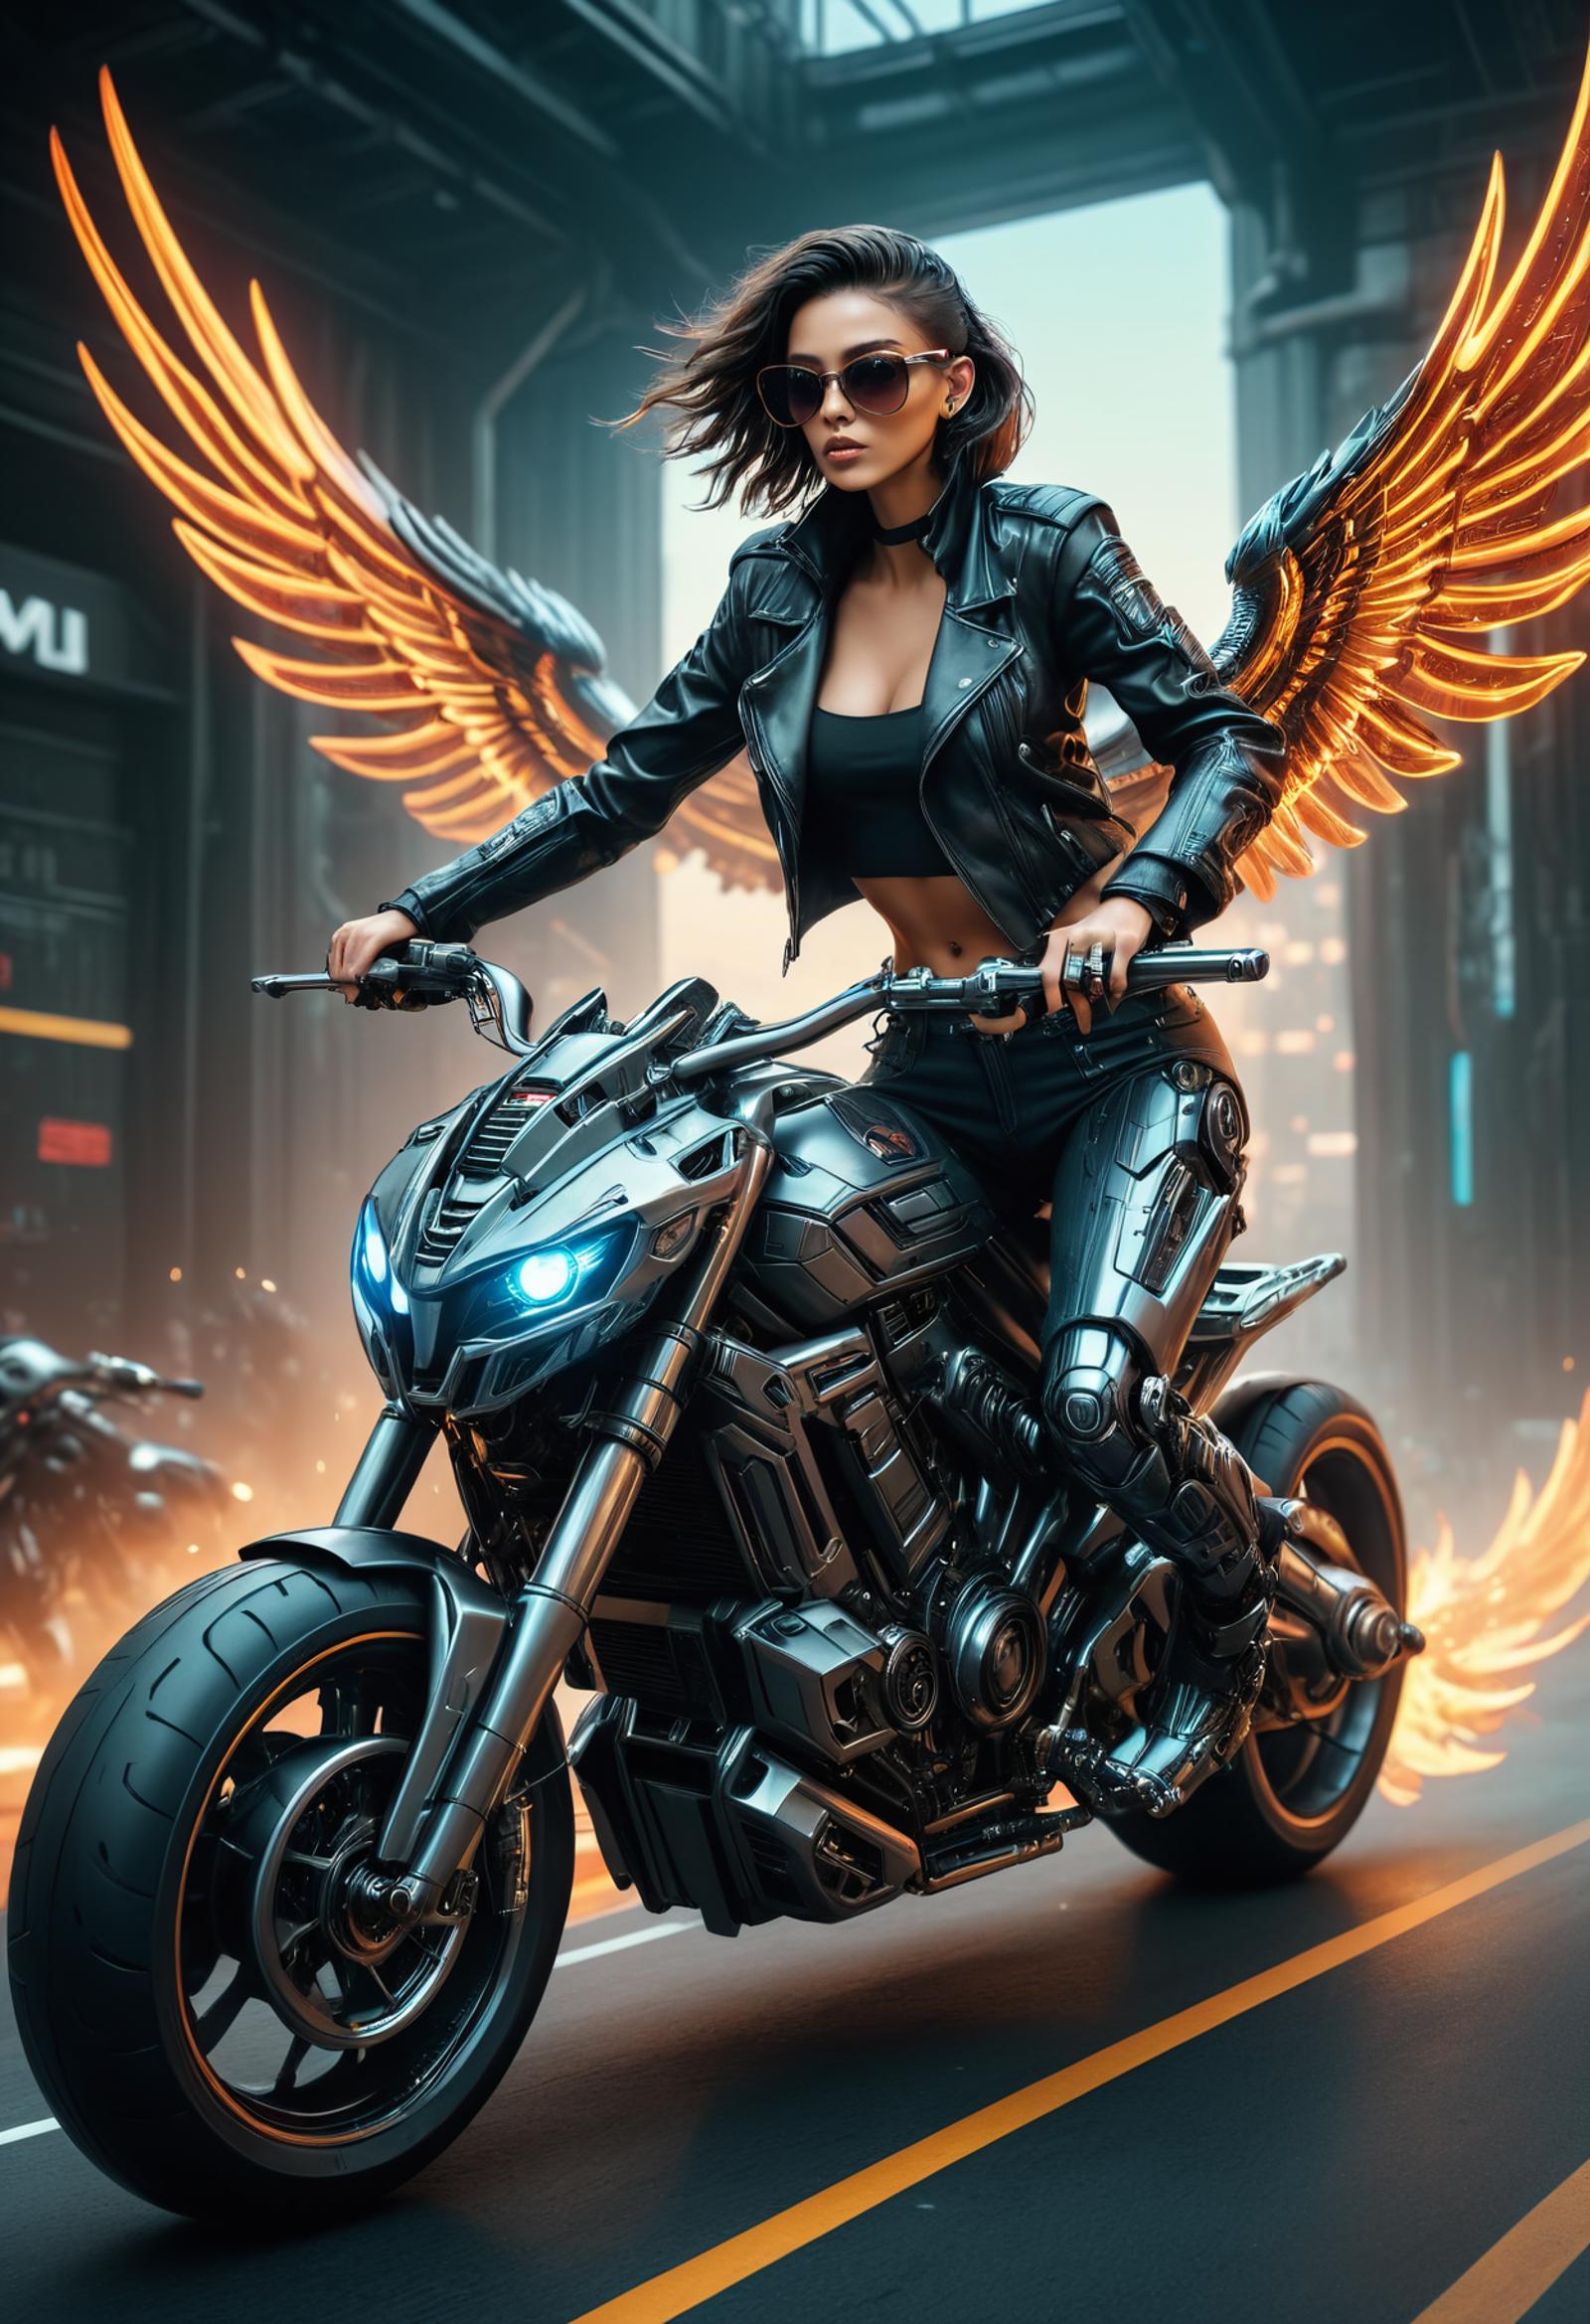 Computer-generated image of a woman riding a motorcycle with wings on her back.